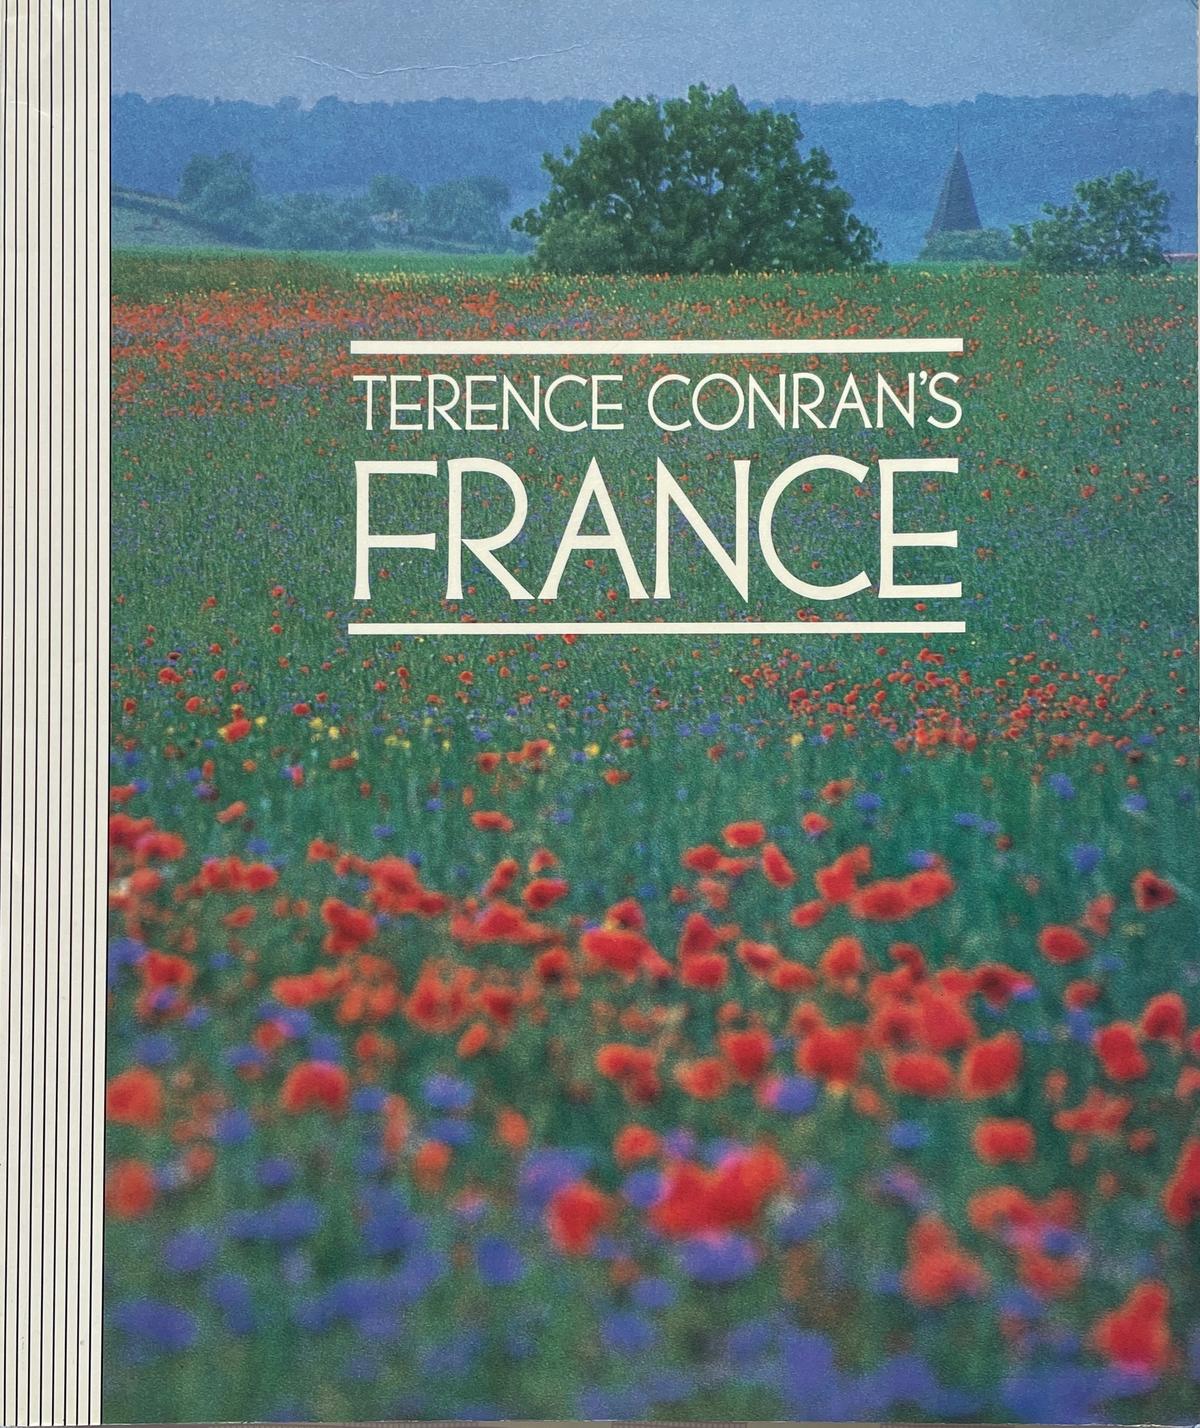 Terence Conran's France